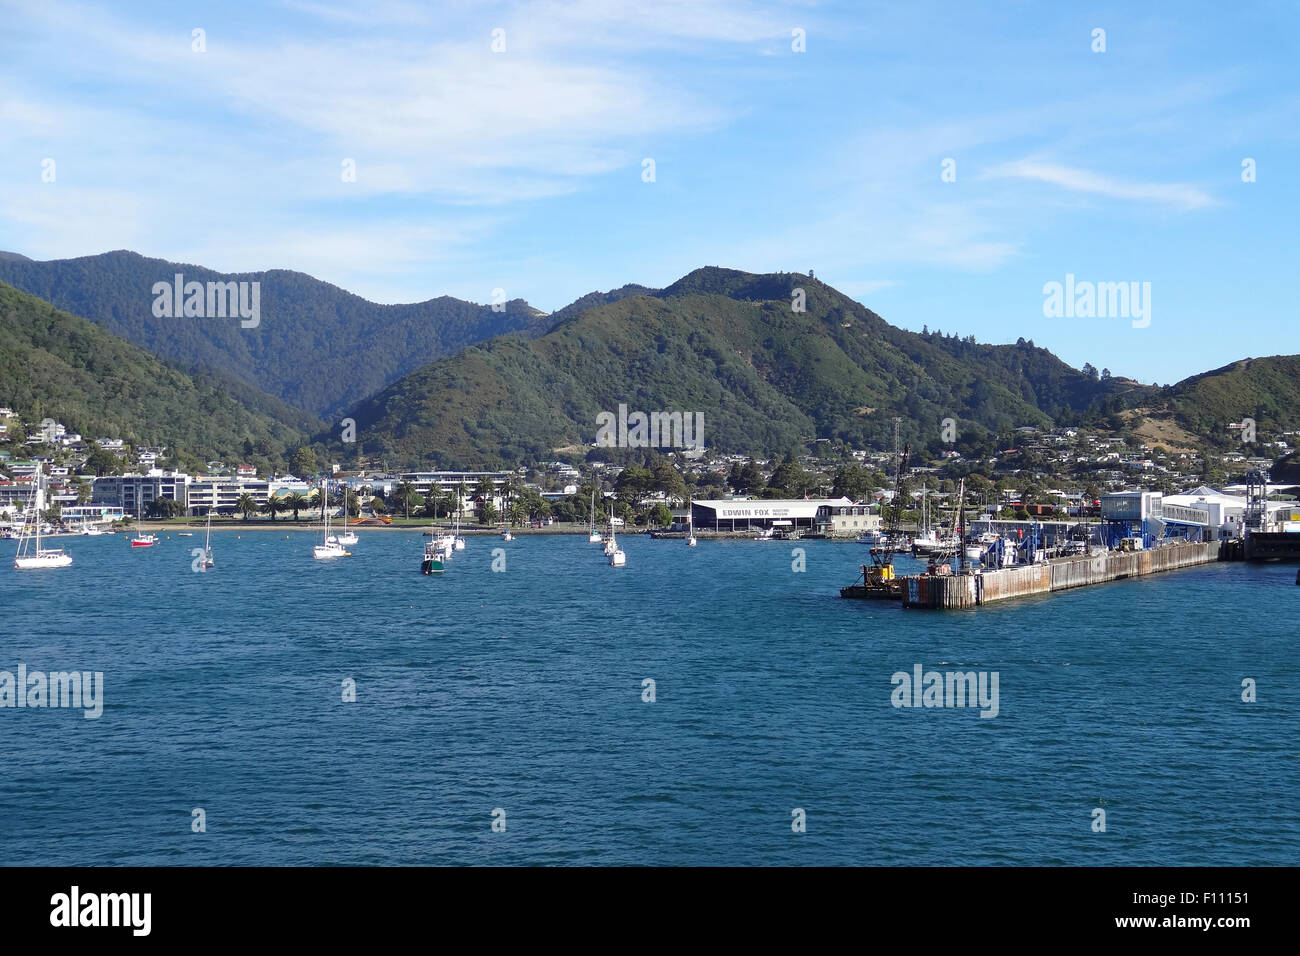 The harbor in Picton, New Zealand on the approach from Marlborough Sounds. Stock Photo